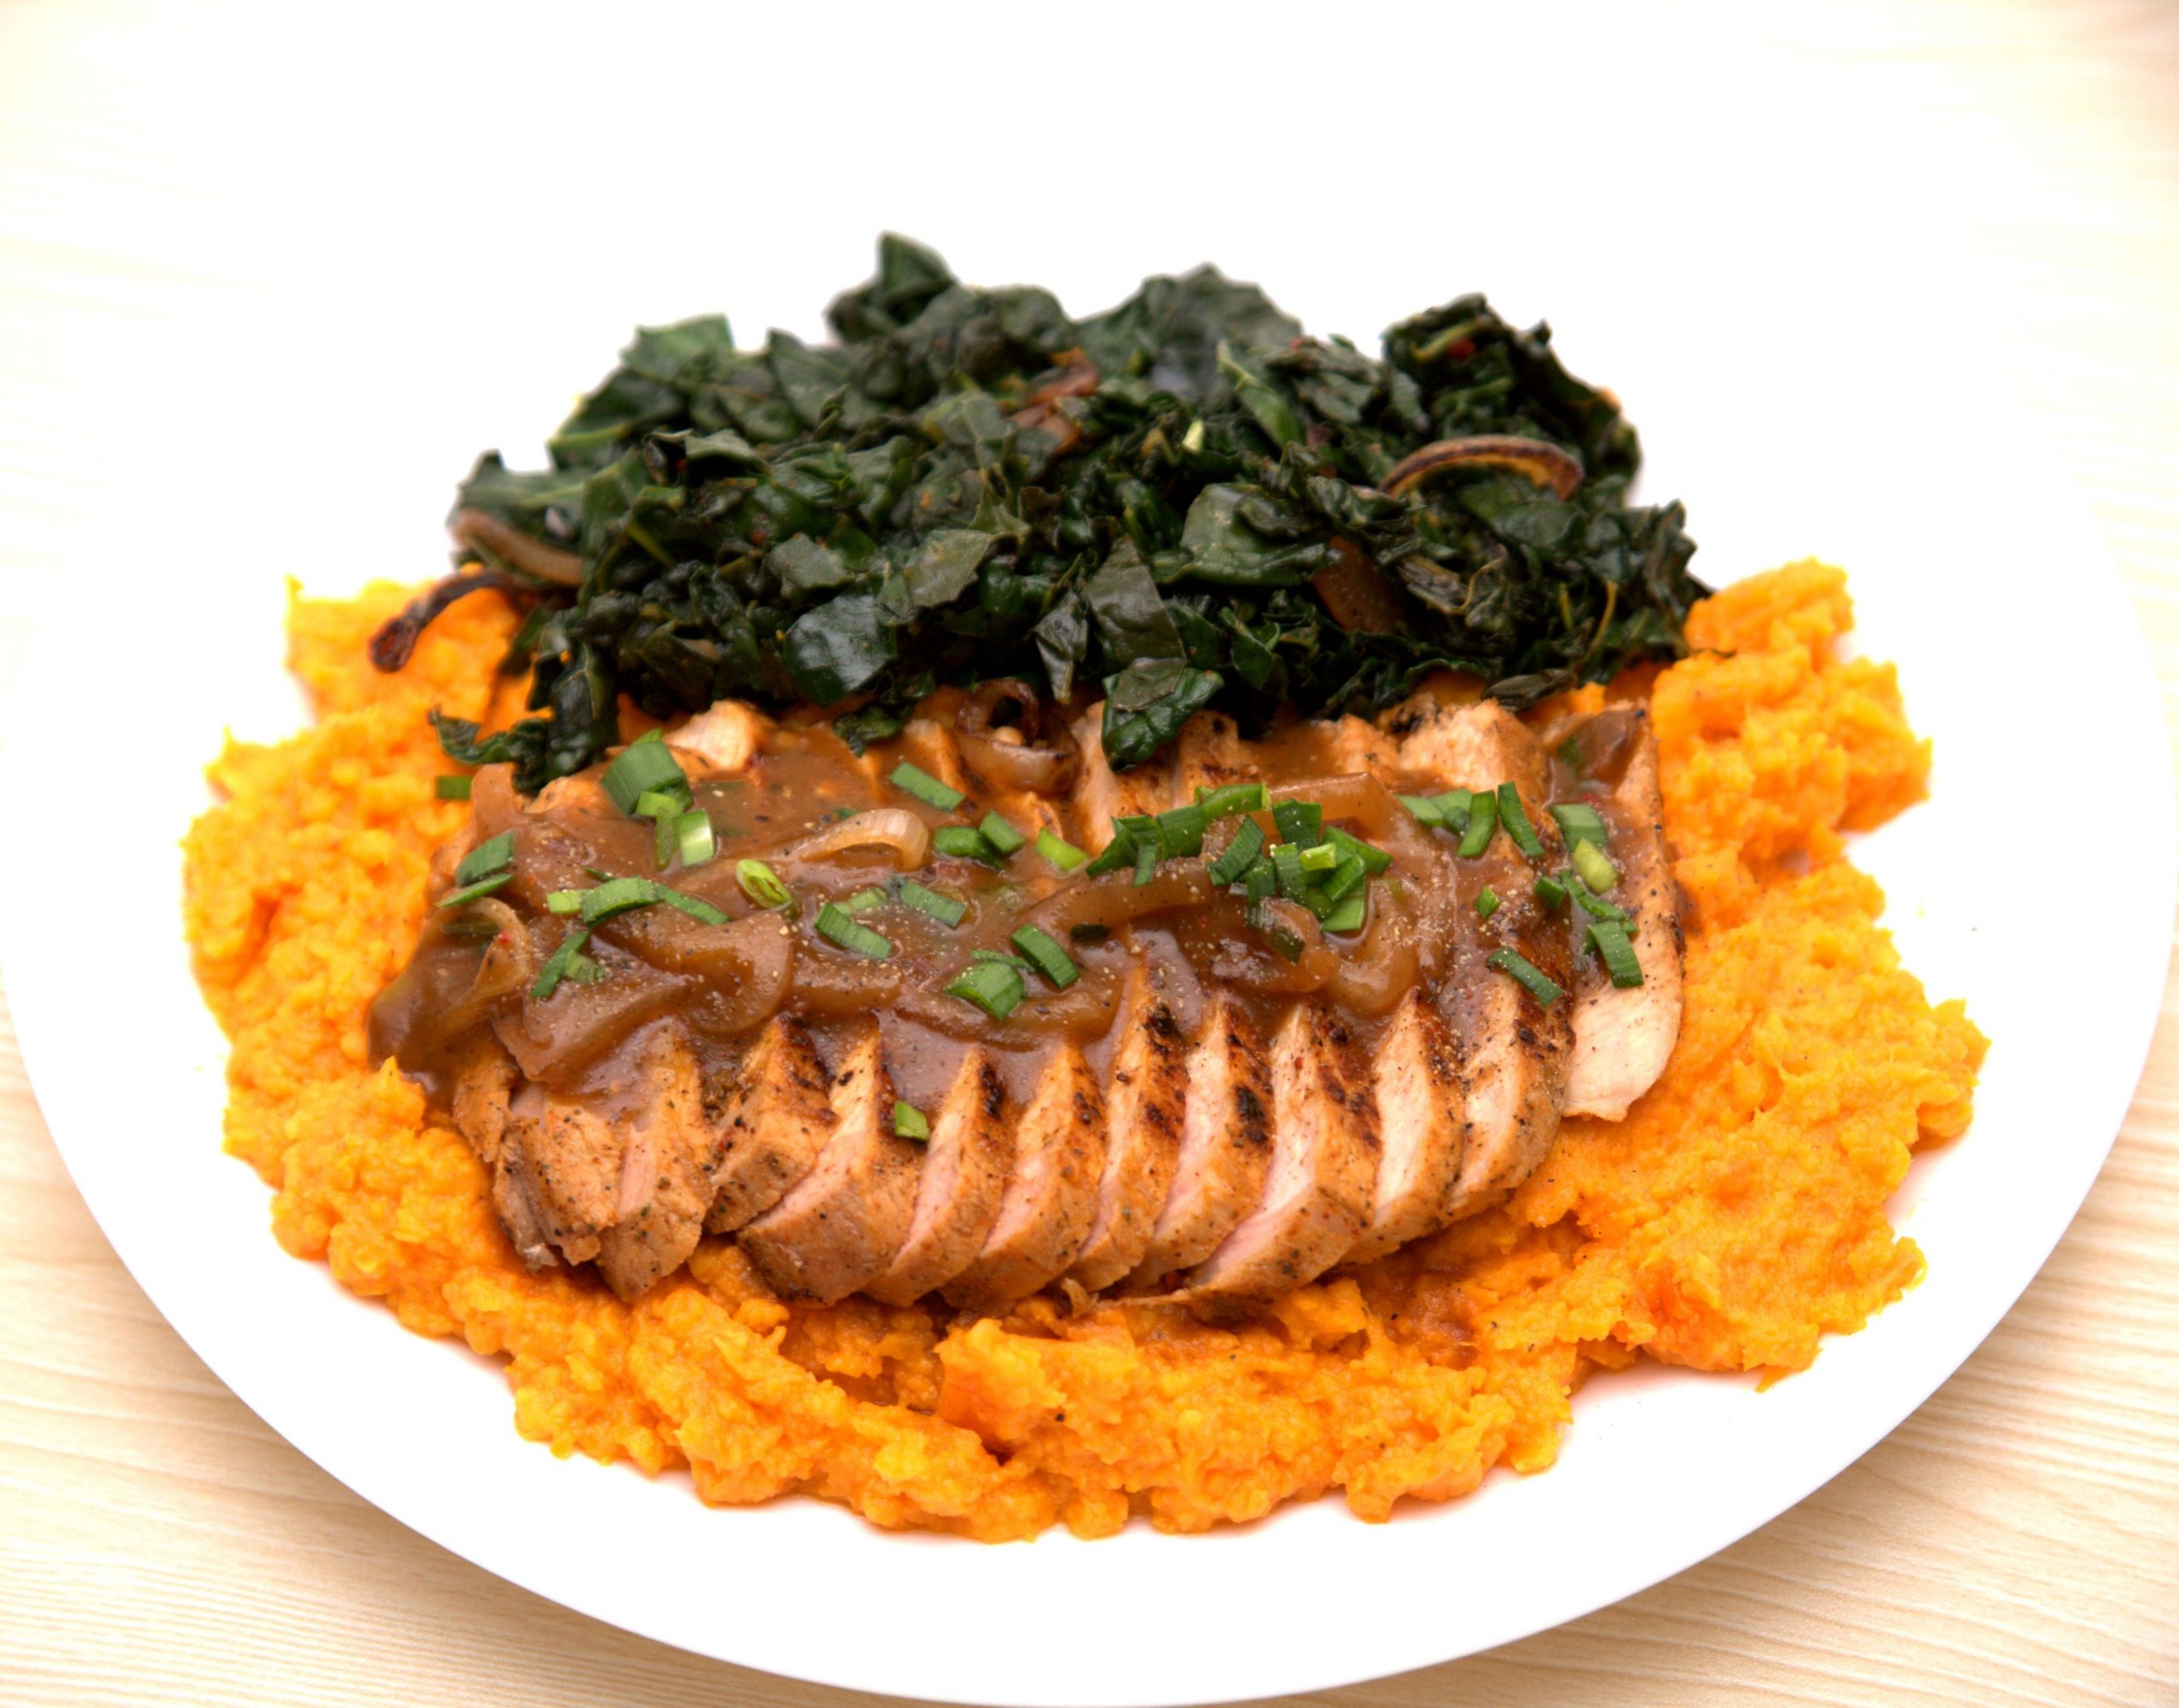 Seared Pork Chops, Kale, and Maple Butter Gravy